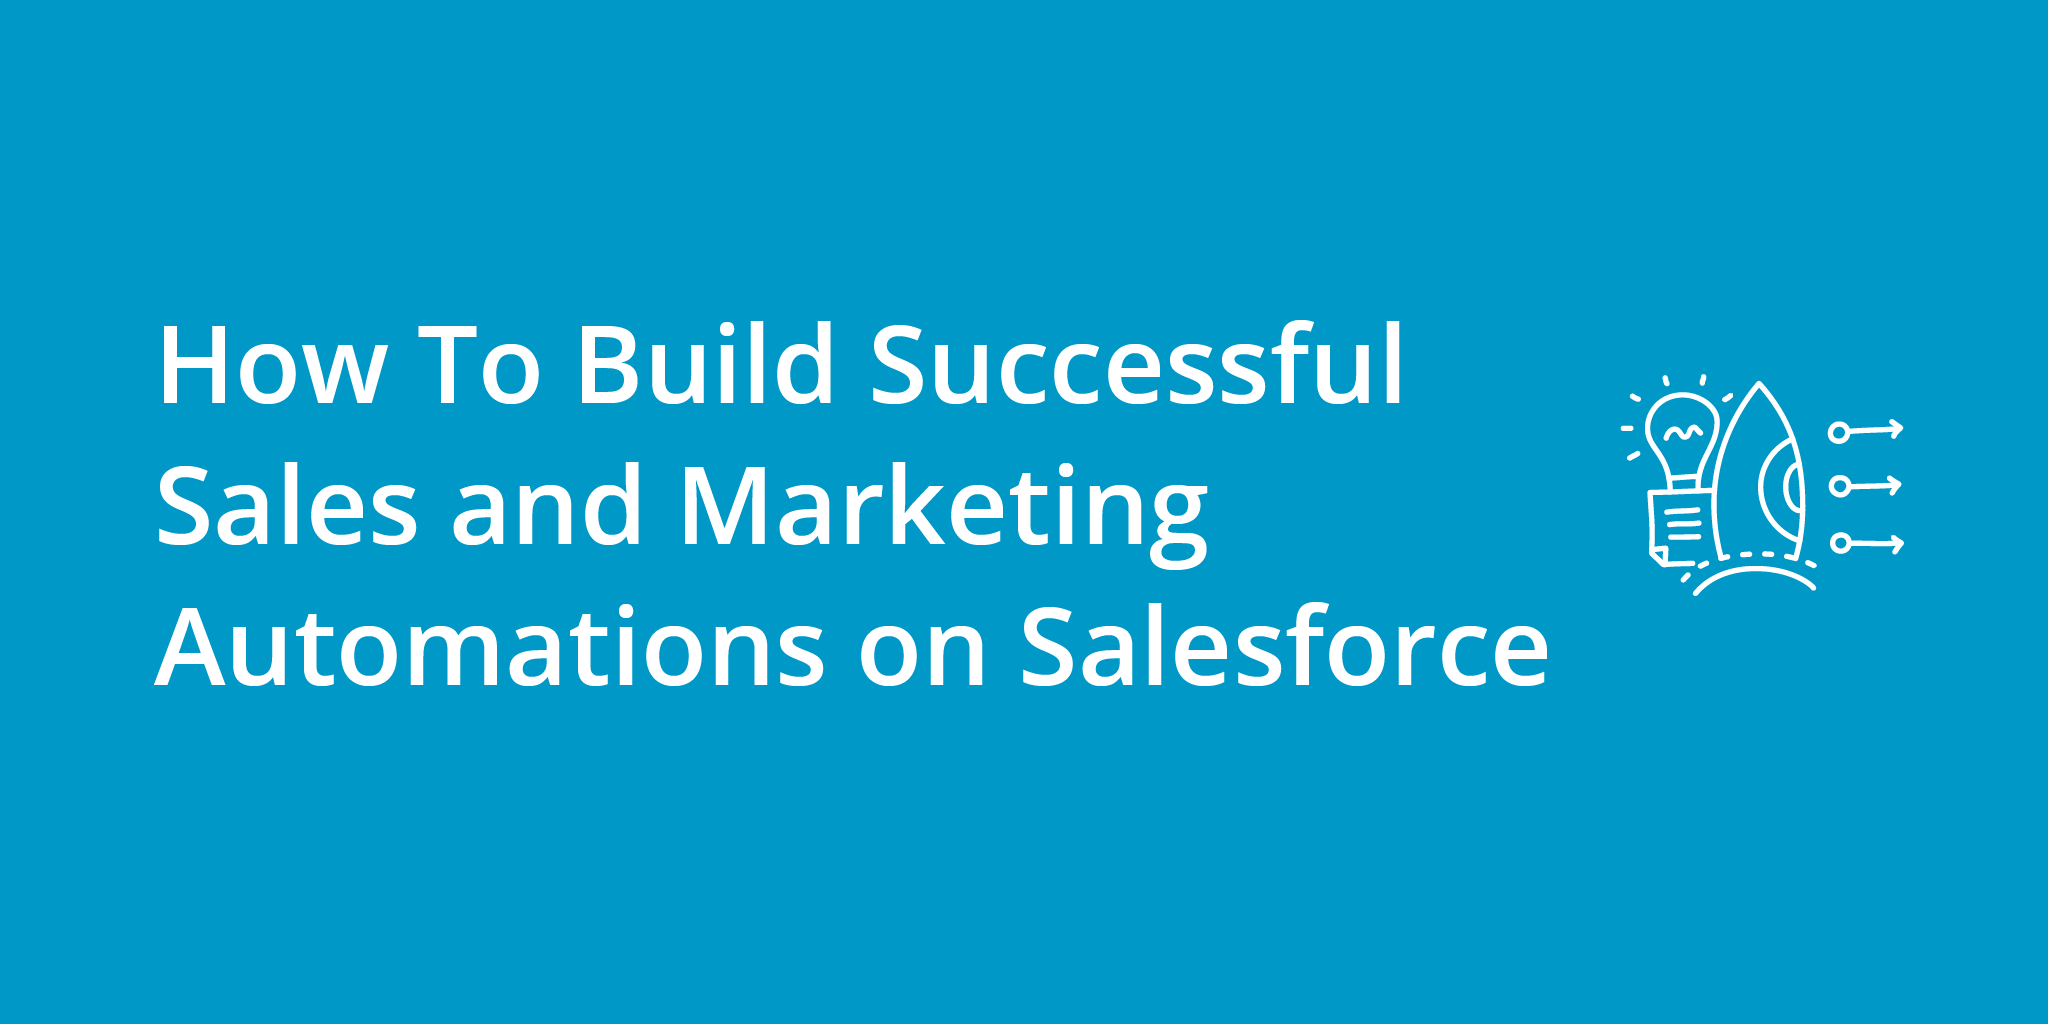 How To Build Successful Sales Automations on Salesforce | Telephones for business